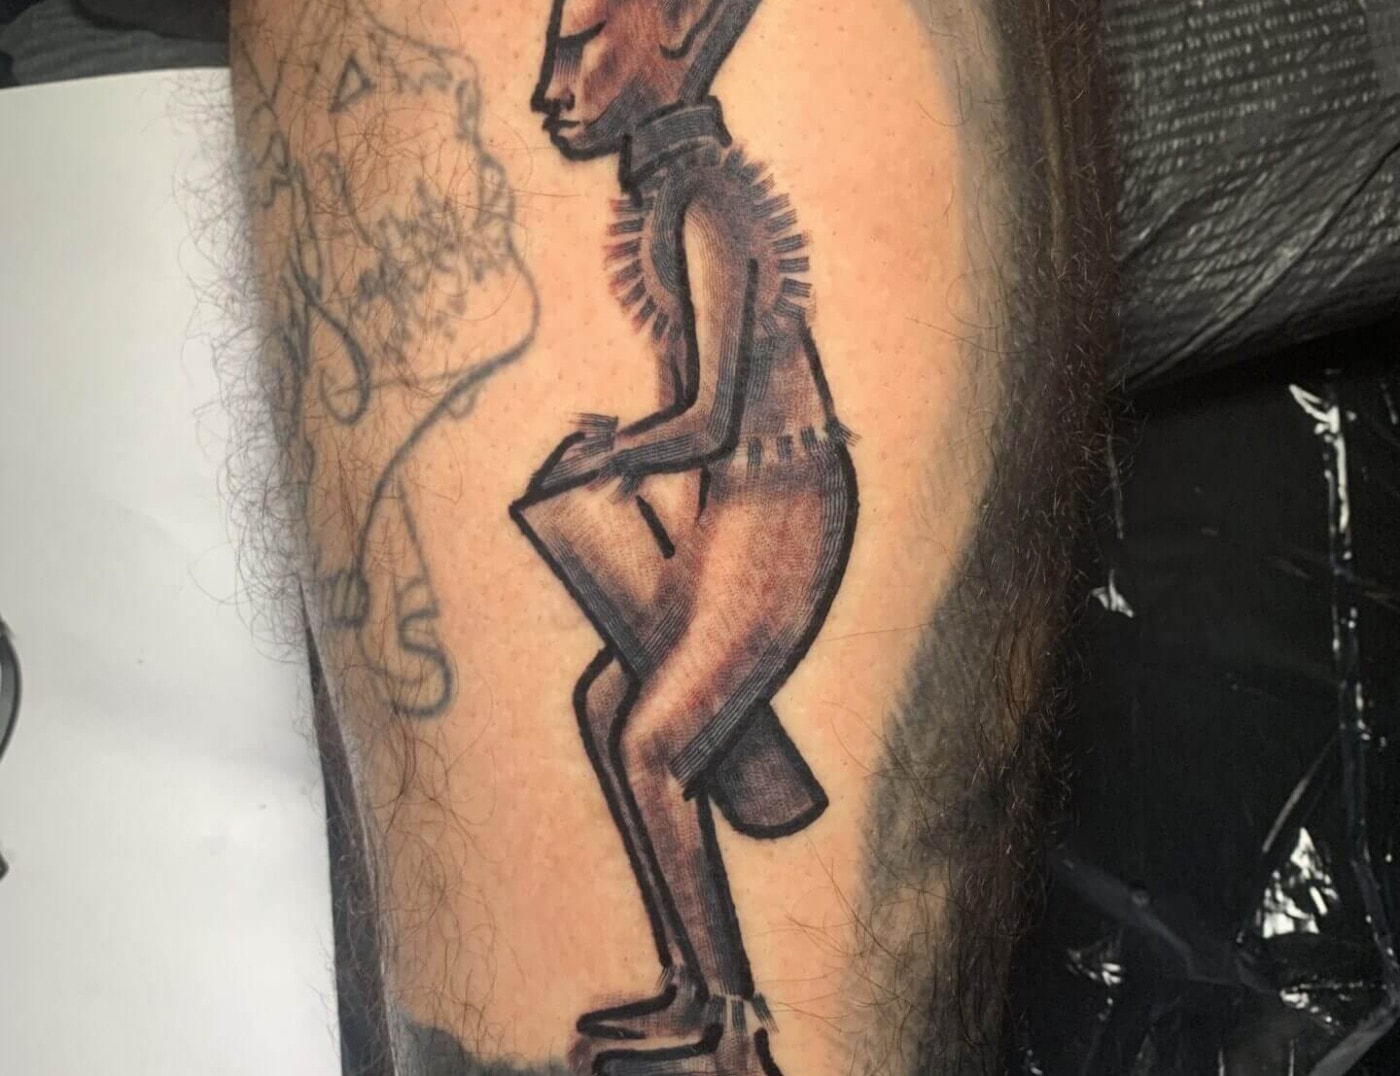 Graffro traditional figurative art by Wheres Wally at Iron Palm Tattoos in Atlanta, Georgia. Walk-Ins are accepted. Call 404-973-7828 or stop by for a free consultation.